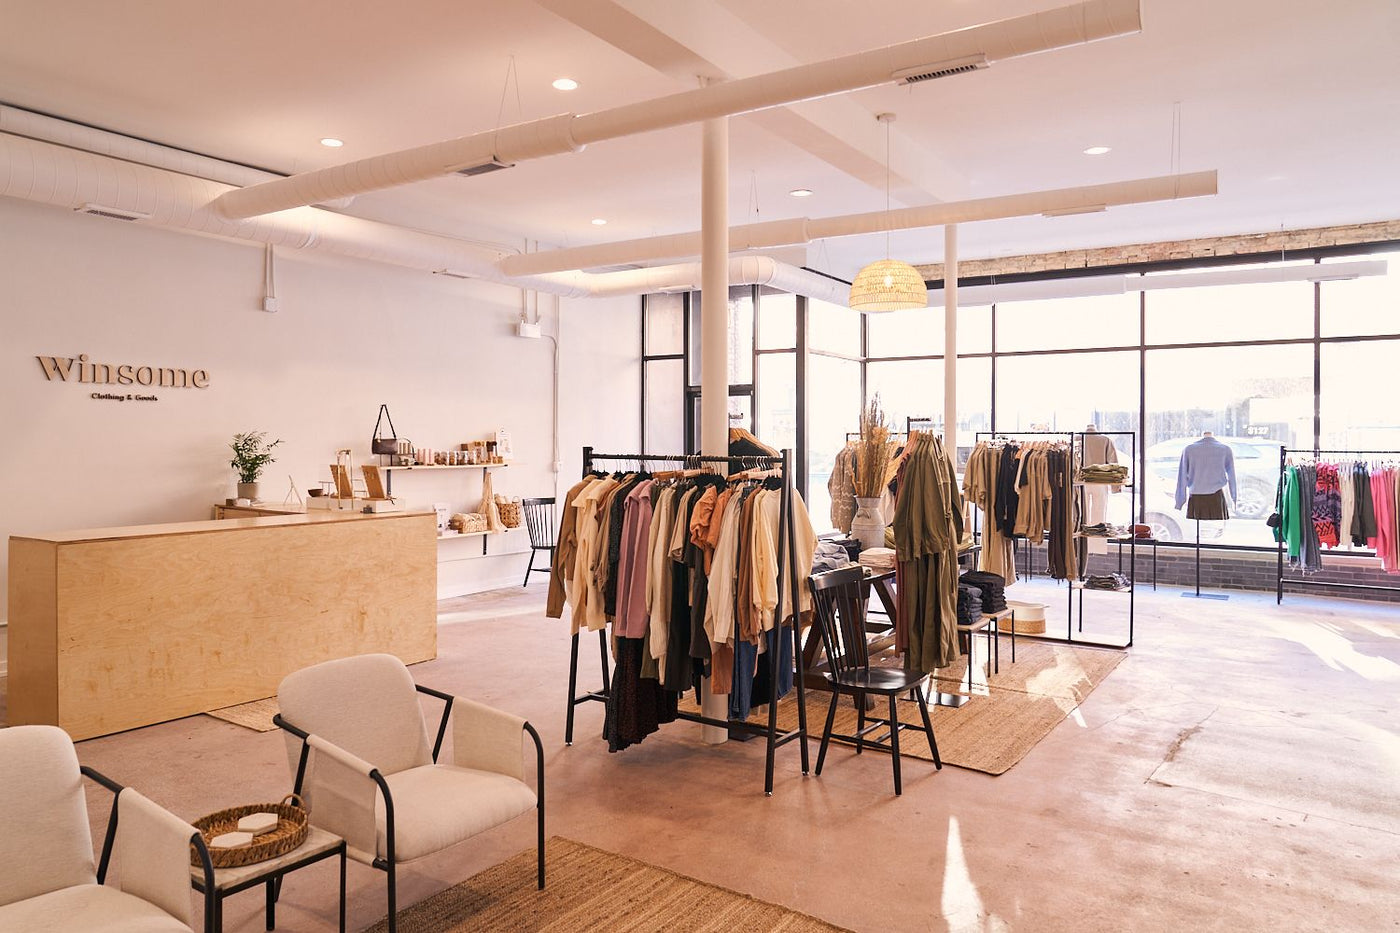 Winsome - a Chicago boutique featuring pieces to feel good about.